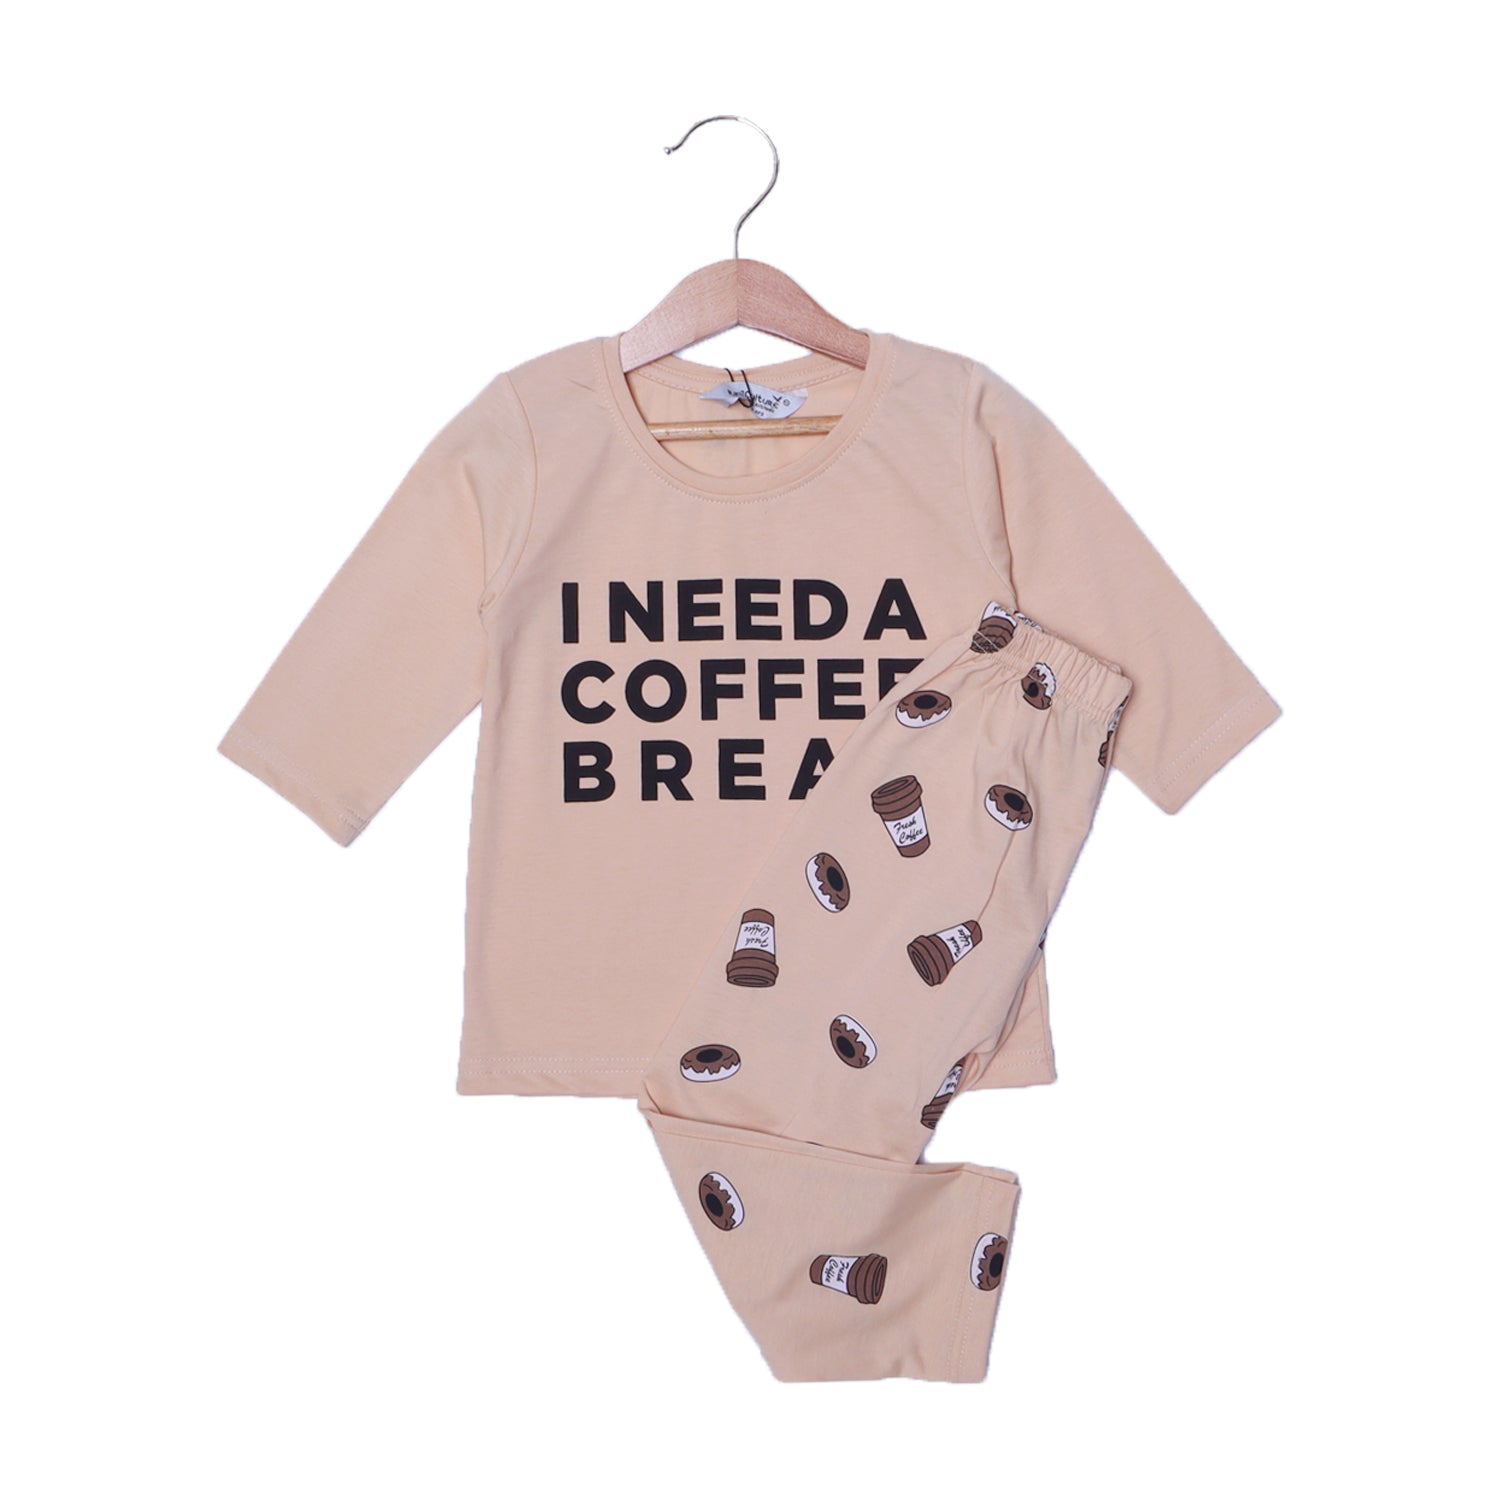 FAWN T-SHIRT WITH DONUT TROUSER COFFEE PRINTED JERSY FABRIC NIGHT SUIT